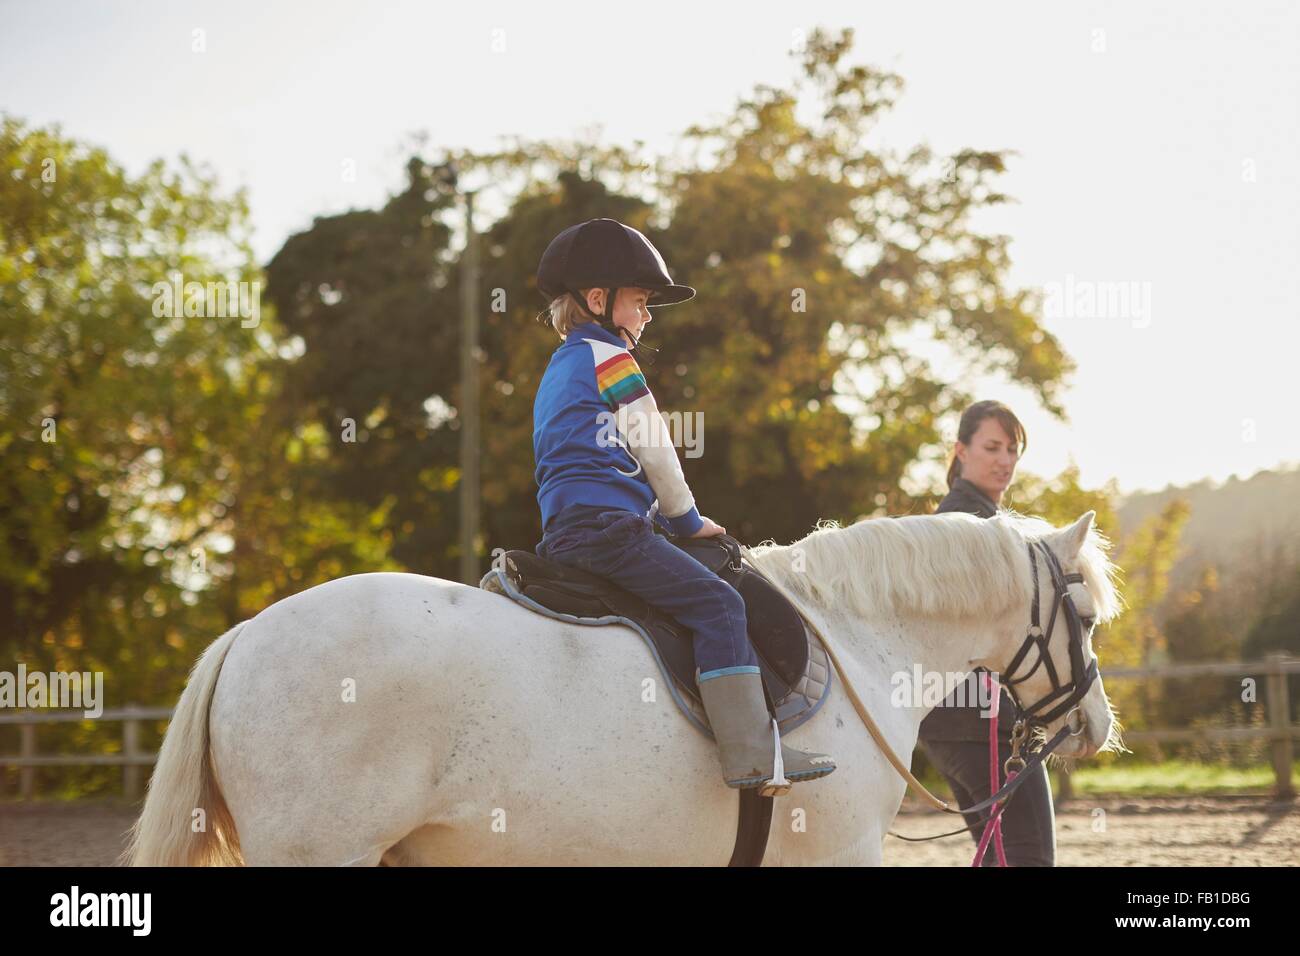 Instructor leading boy riding pony in equestrian arena Stock Photo